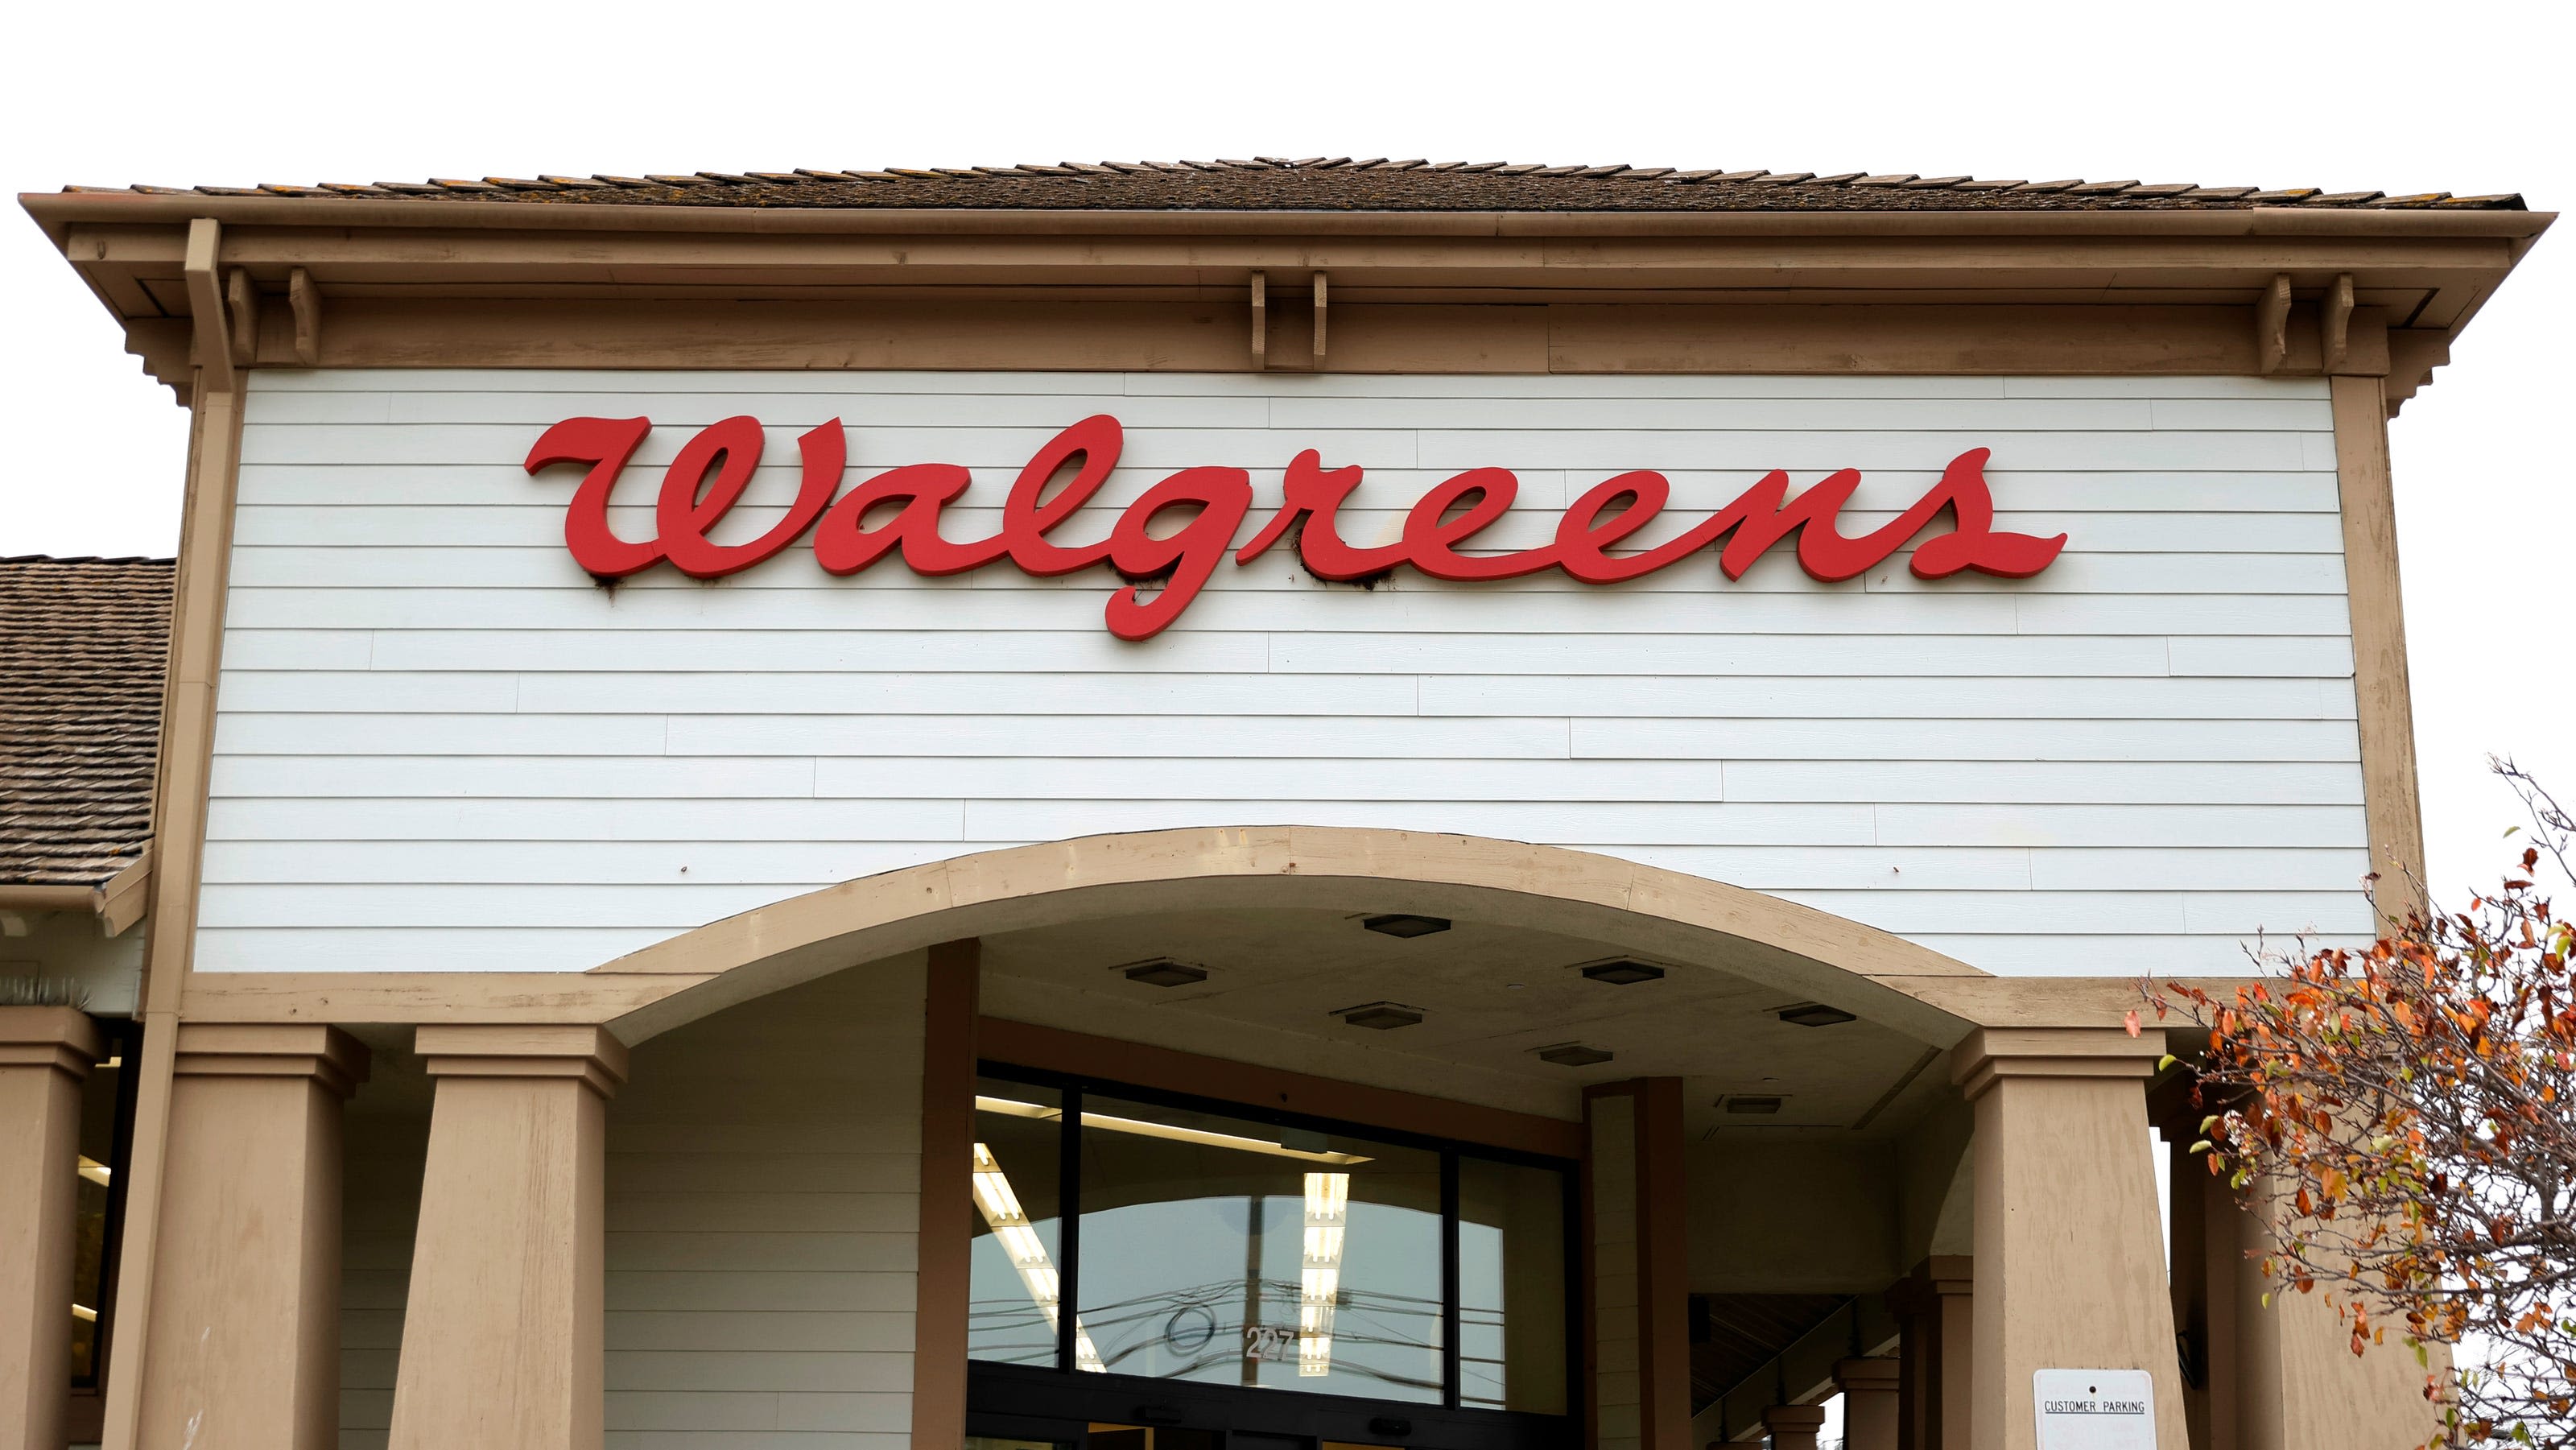 Walgreens lowering prices on over 1,300 products, including snacks, gummy vitamins, Squishmallows, more